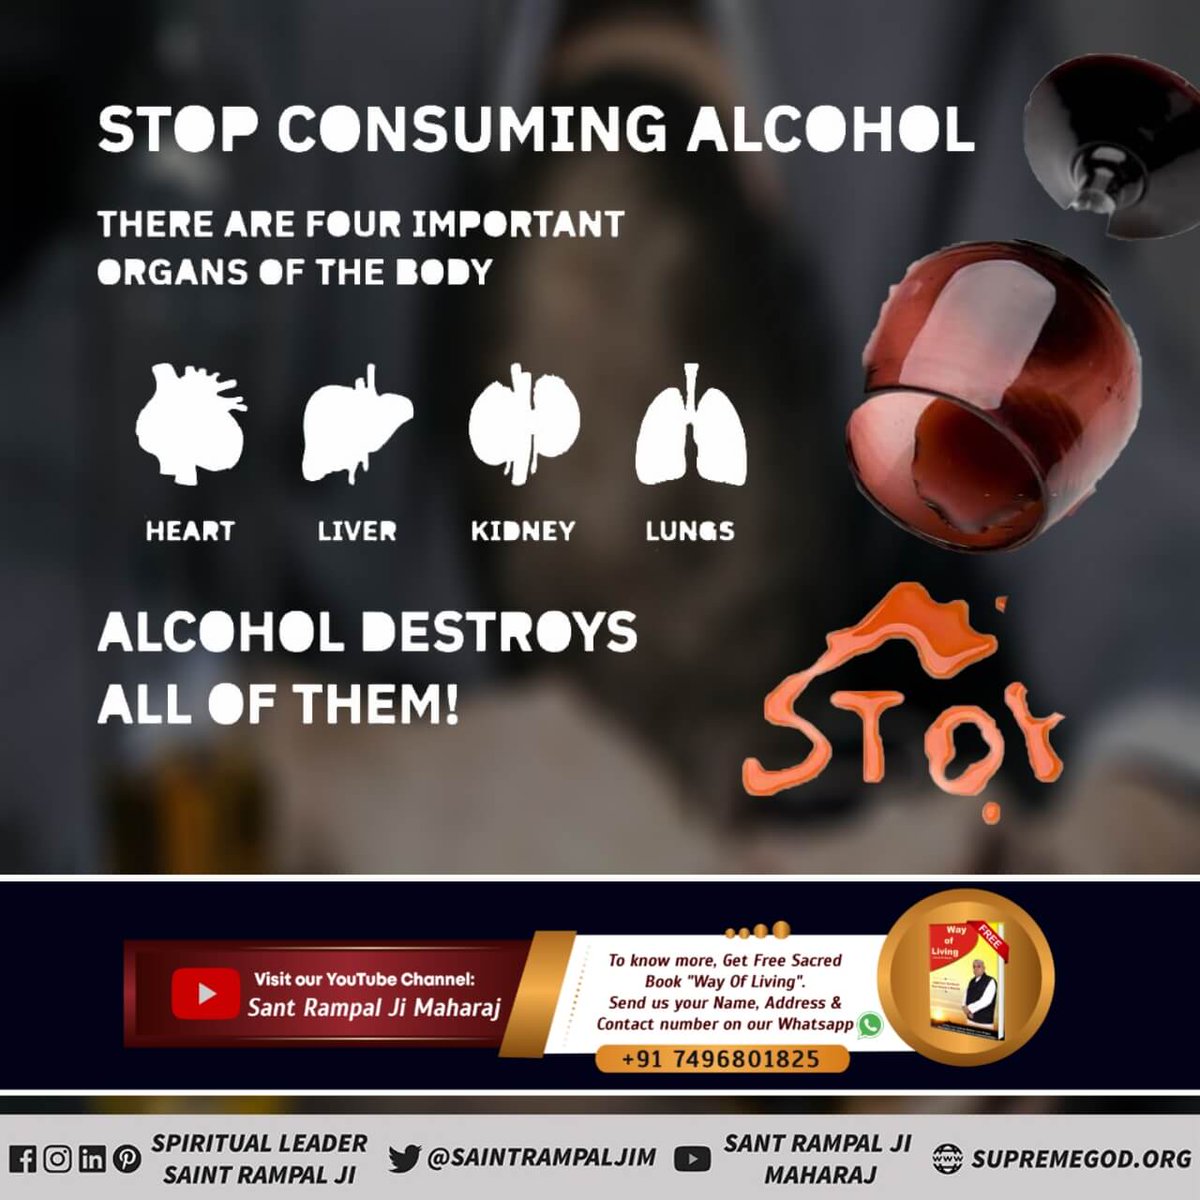 #StopDrinkingAlcohol
✔There are four important organs of the body: - 1. Lungs, 2. Liver, 3. Kidneys, and 4. Heart. Alcohol destroys these four organs.
 - Saint Rampal Ji Maharaj
#GodMorningThrusday